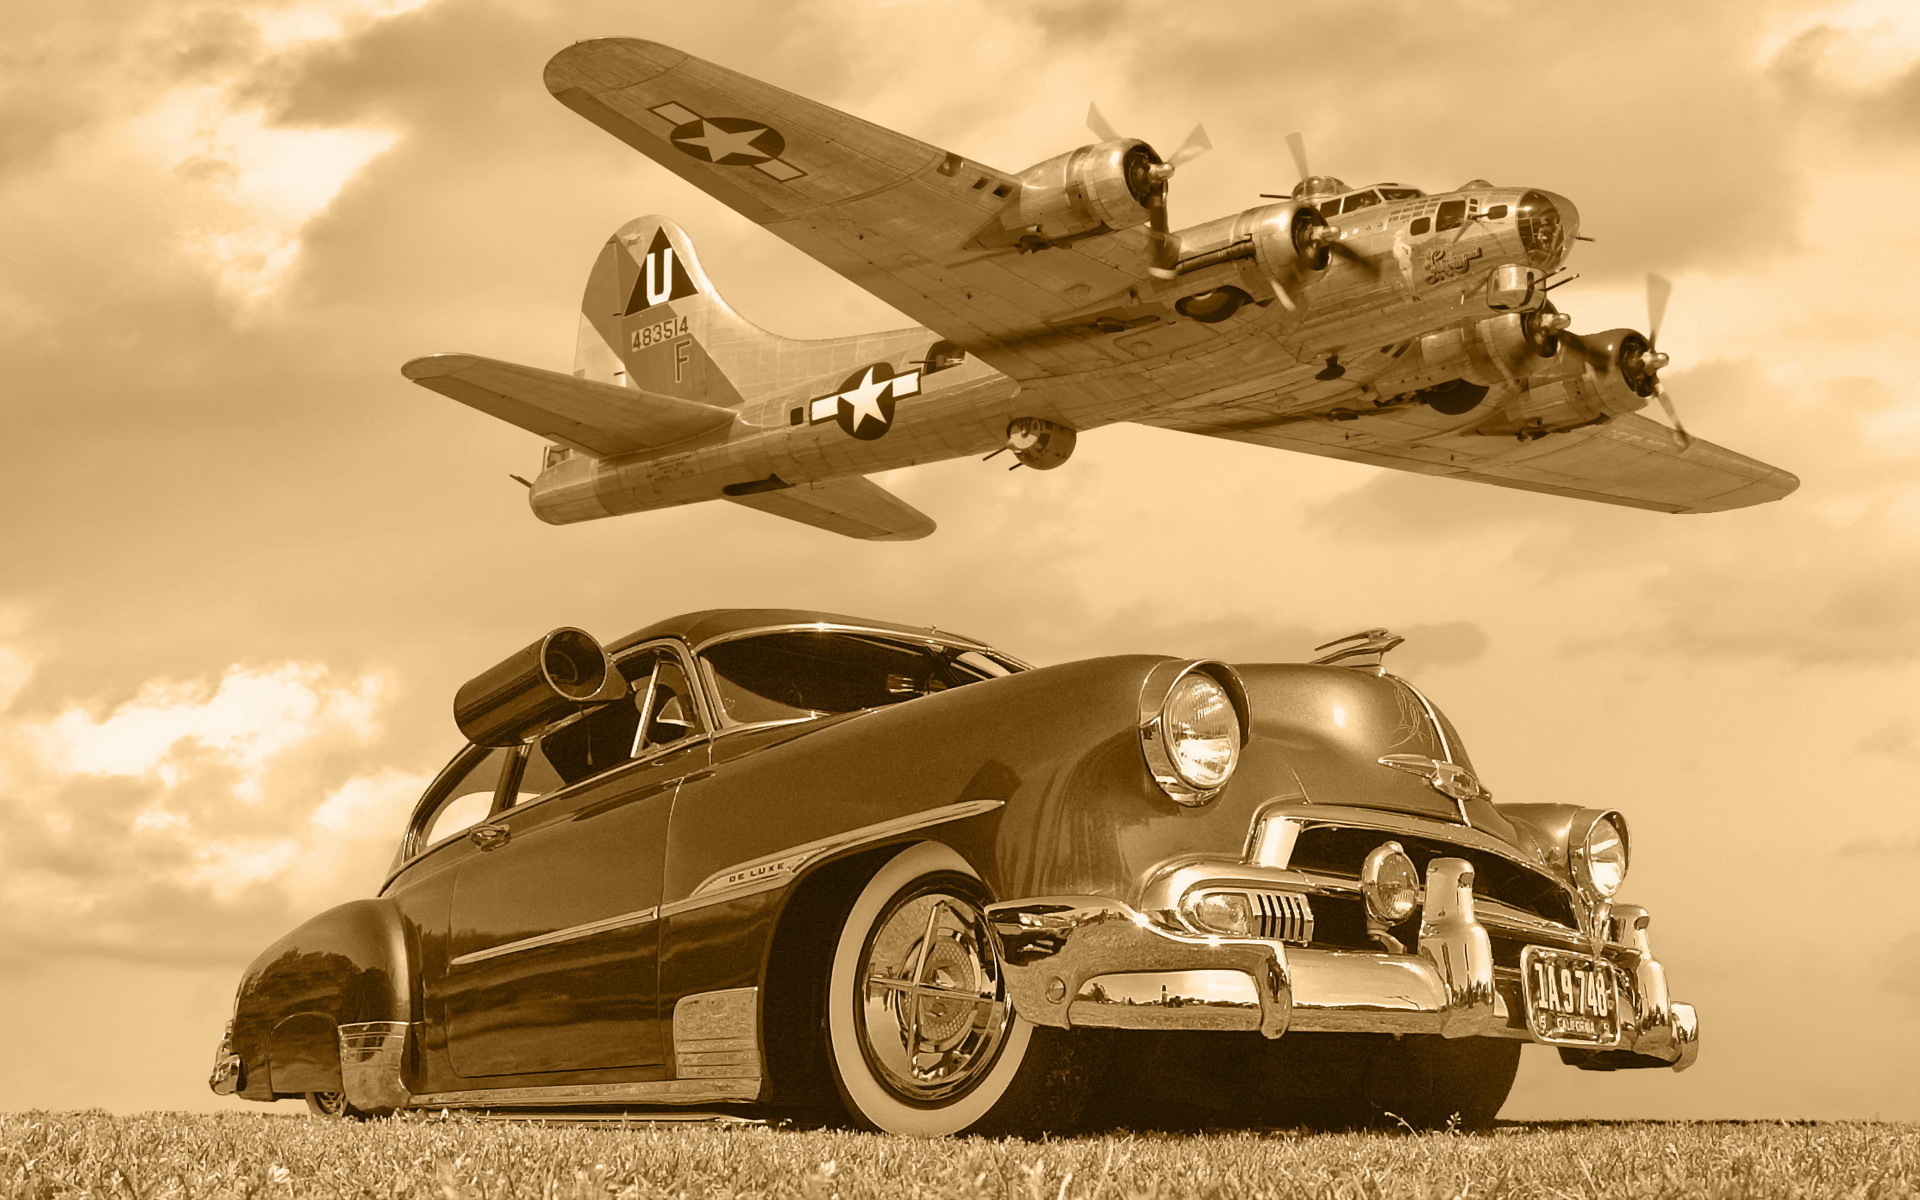 chevrolet, B Car, Plane, Aircrafts, Lowrider, Classic, Military, Flight, Fly, Sepia, Monochrome, Sky, Clouds Wallpaper HD / Desktop and Mobile Background